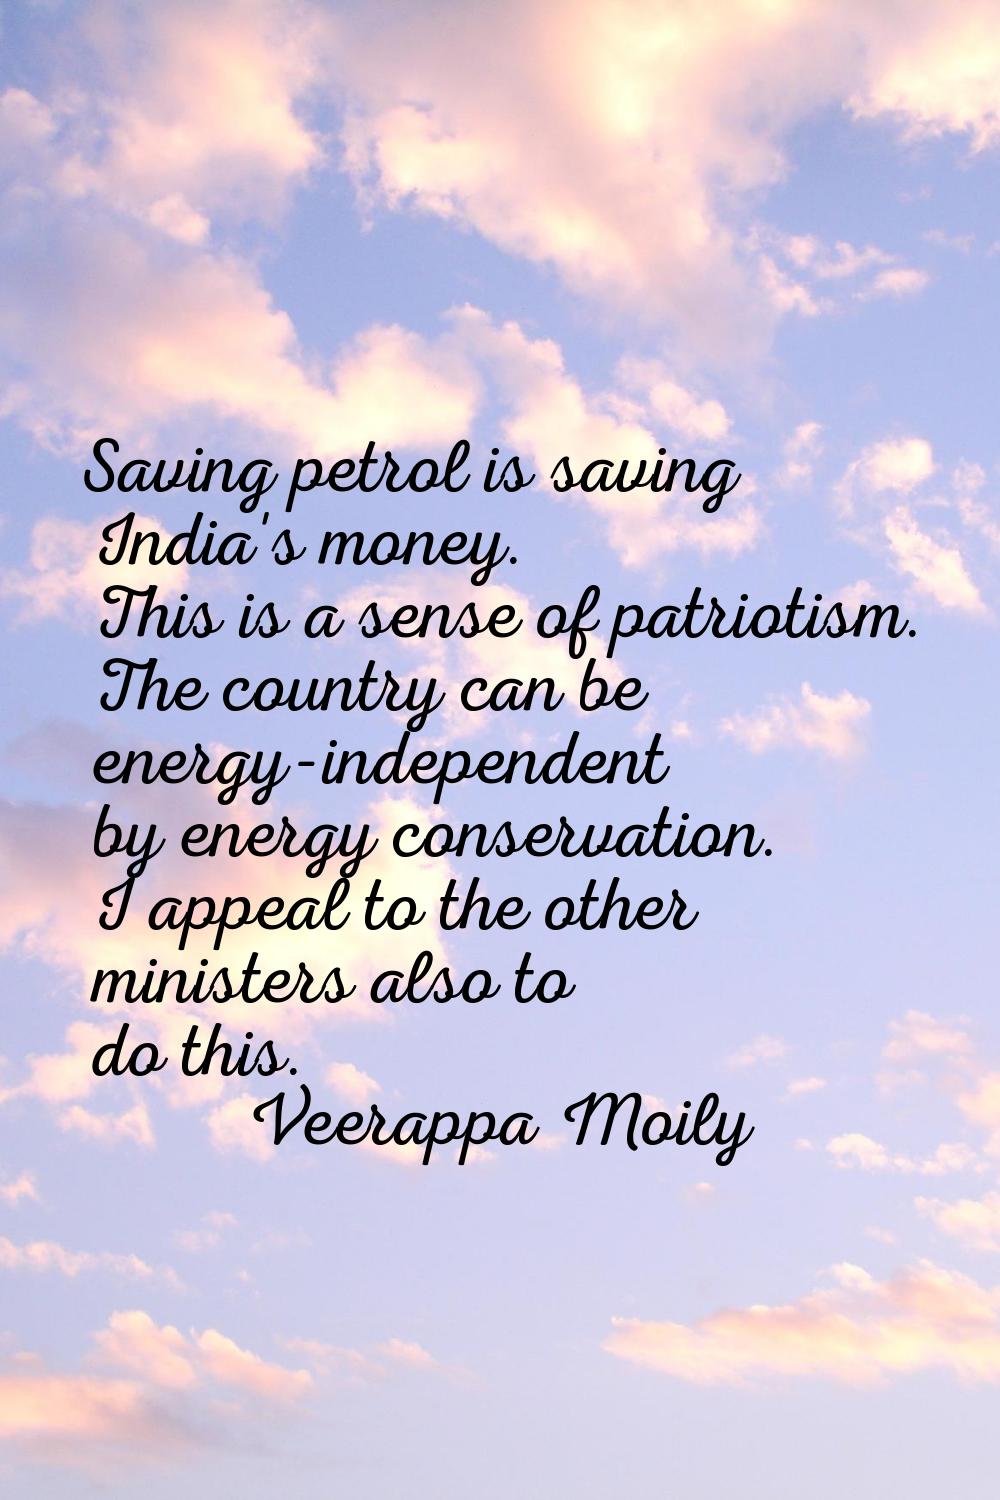 Saving petrol is saving India's money. This is a sense of patriotism. The country can be energy-ind